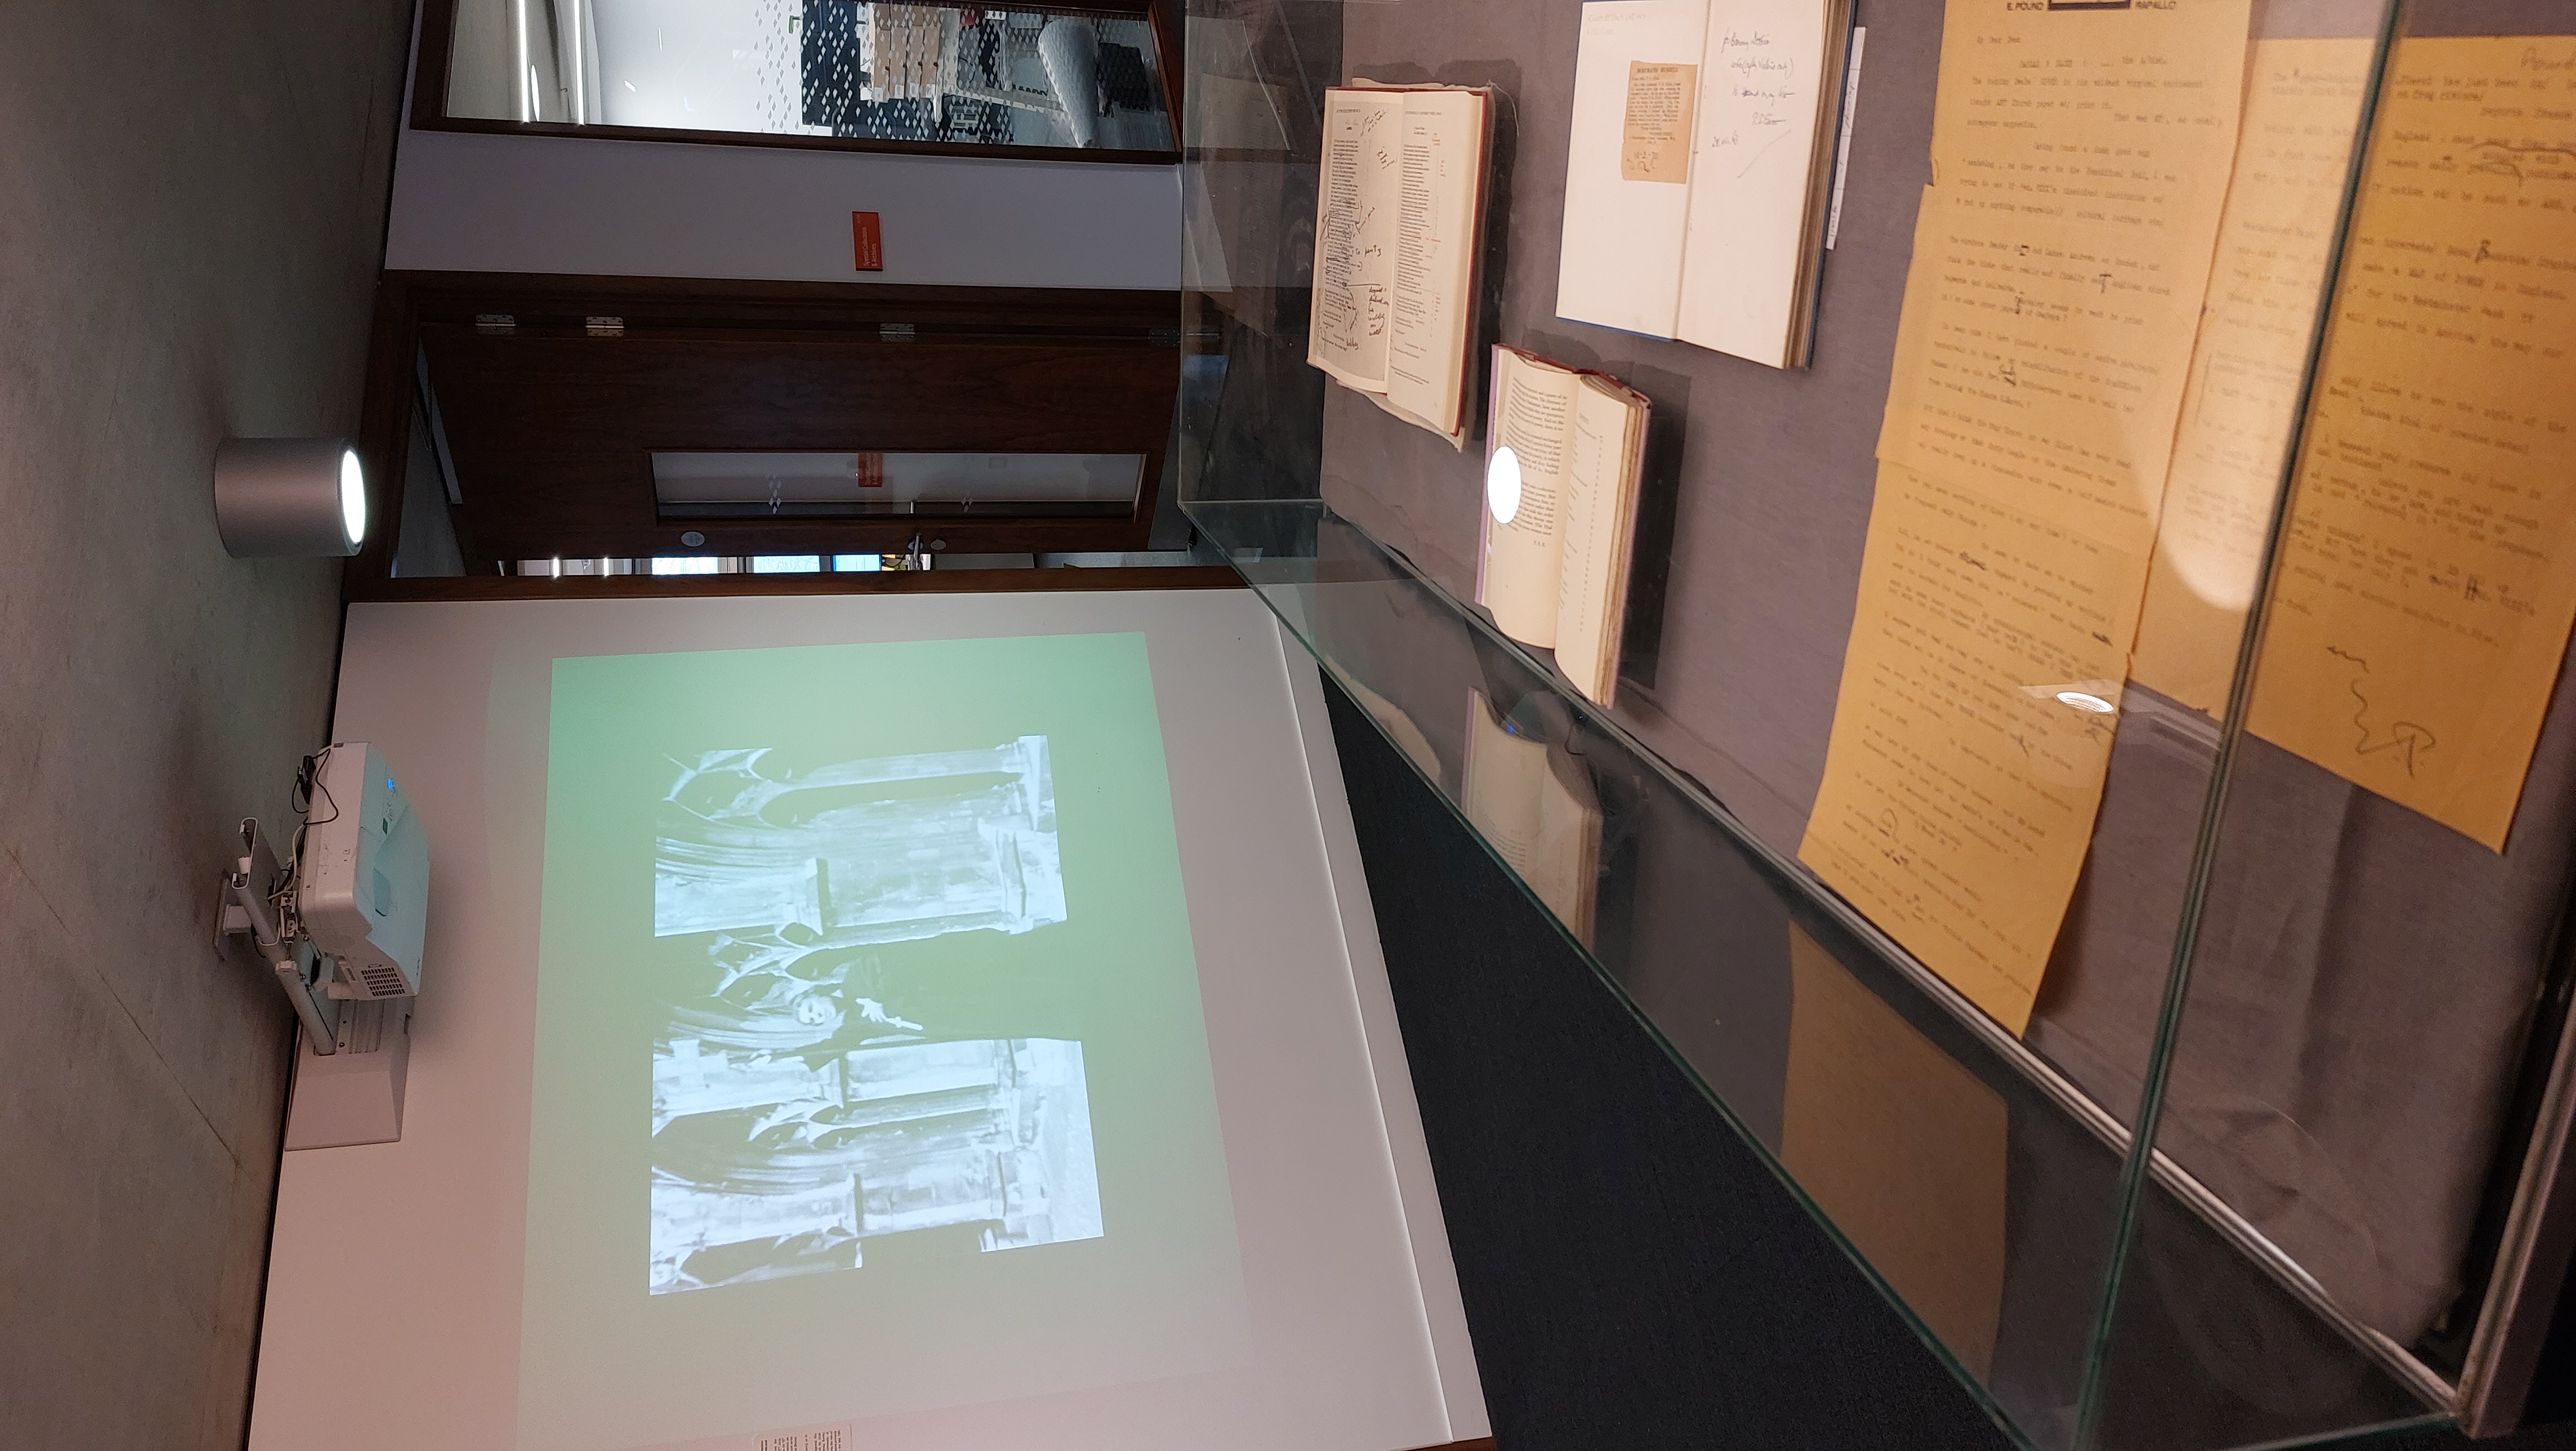 Image of a exhibition case in the foreground containing books and letters, and a film screen in the background showing a black and white image of a man in a cathedral setting 